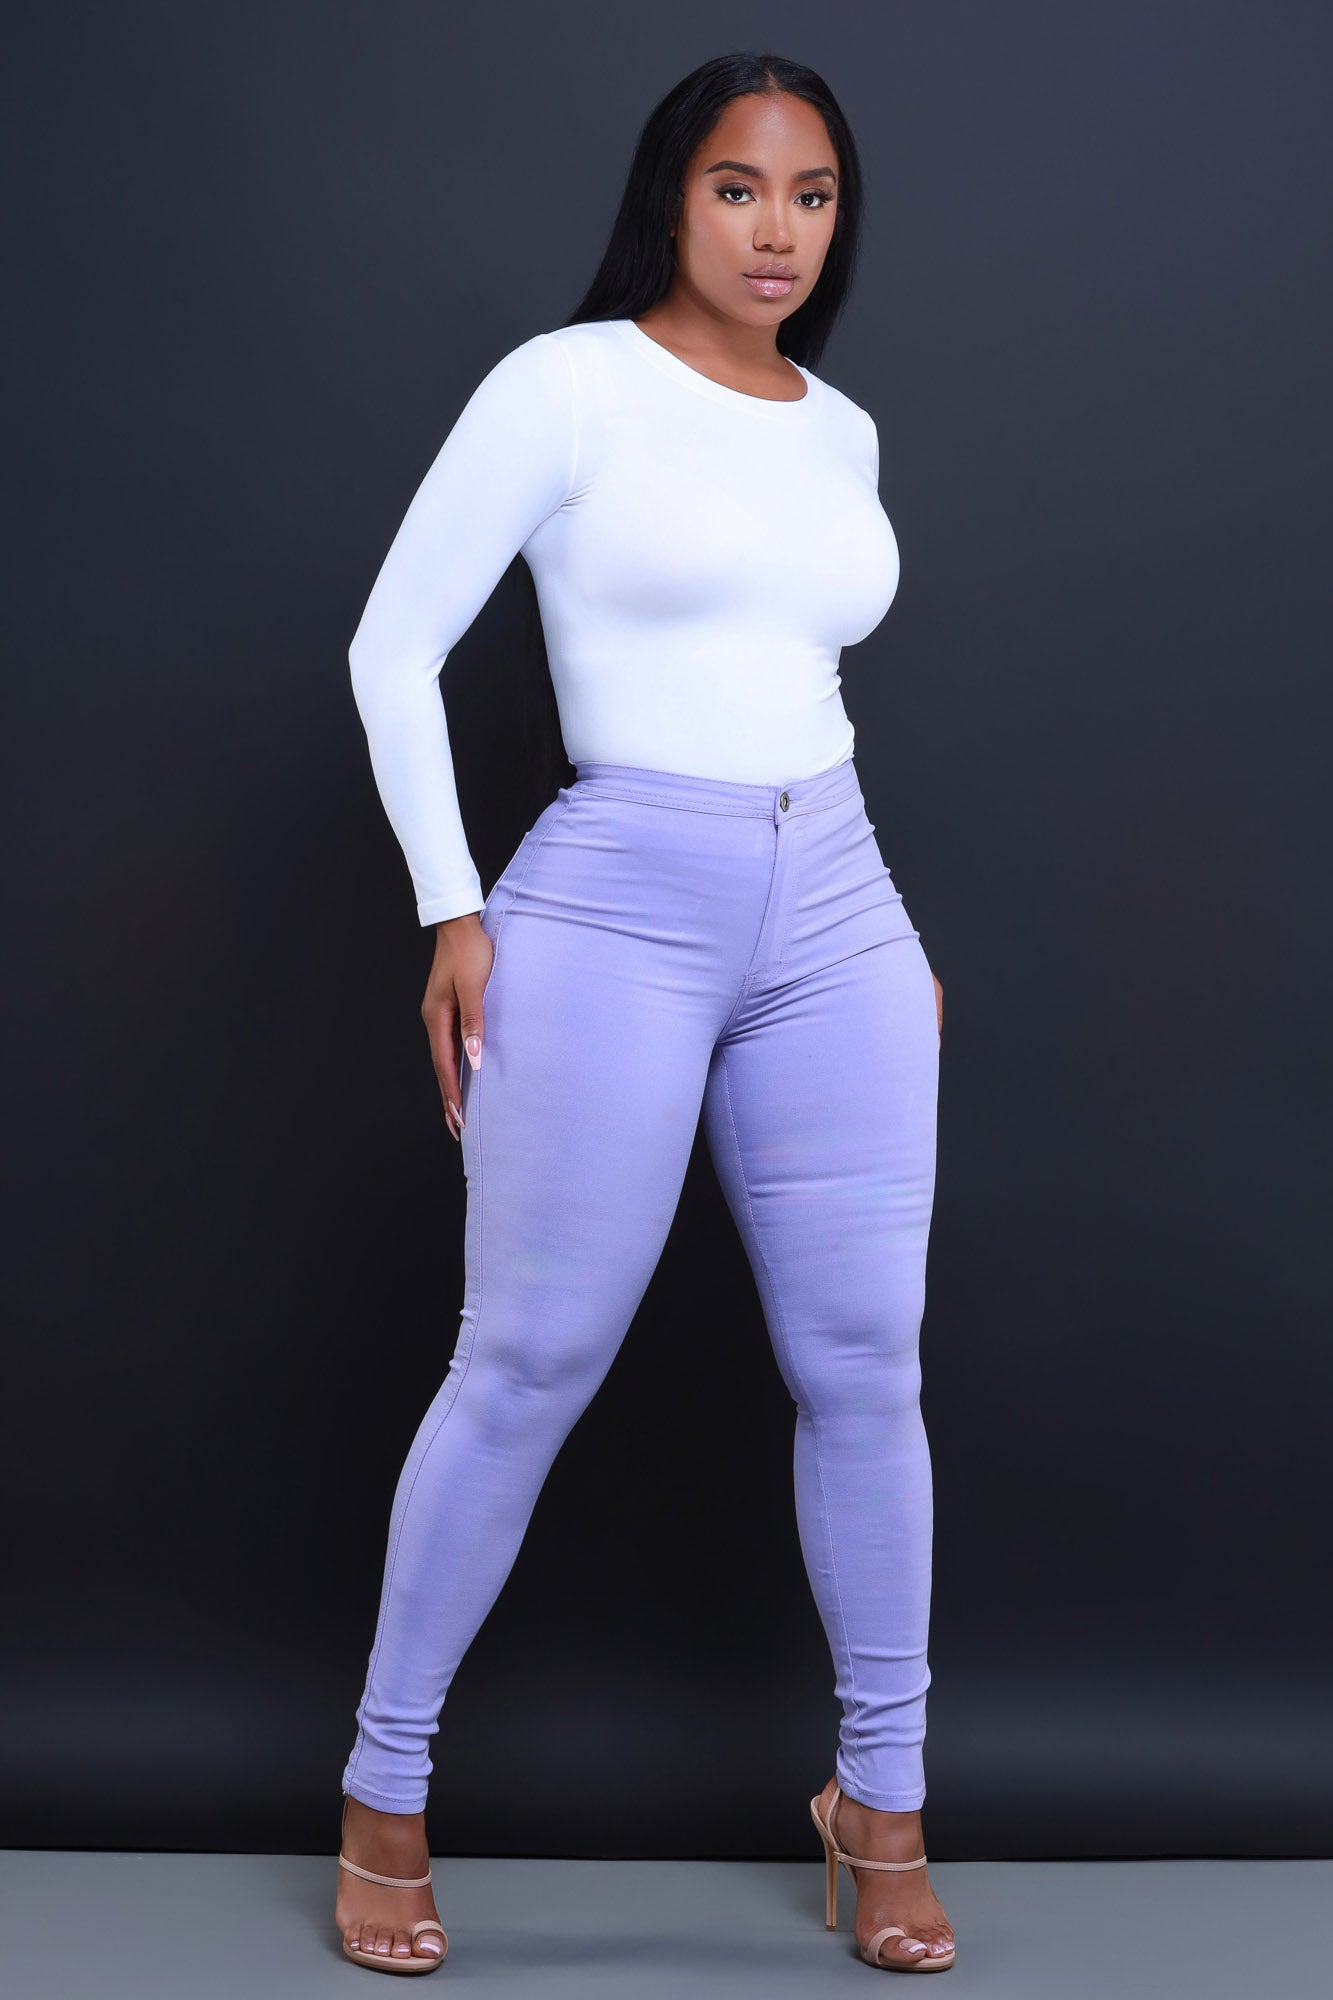 $15.99 Super Swank High Waist Stretchy Jeans - Baby Blue